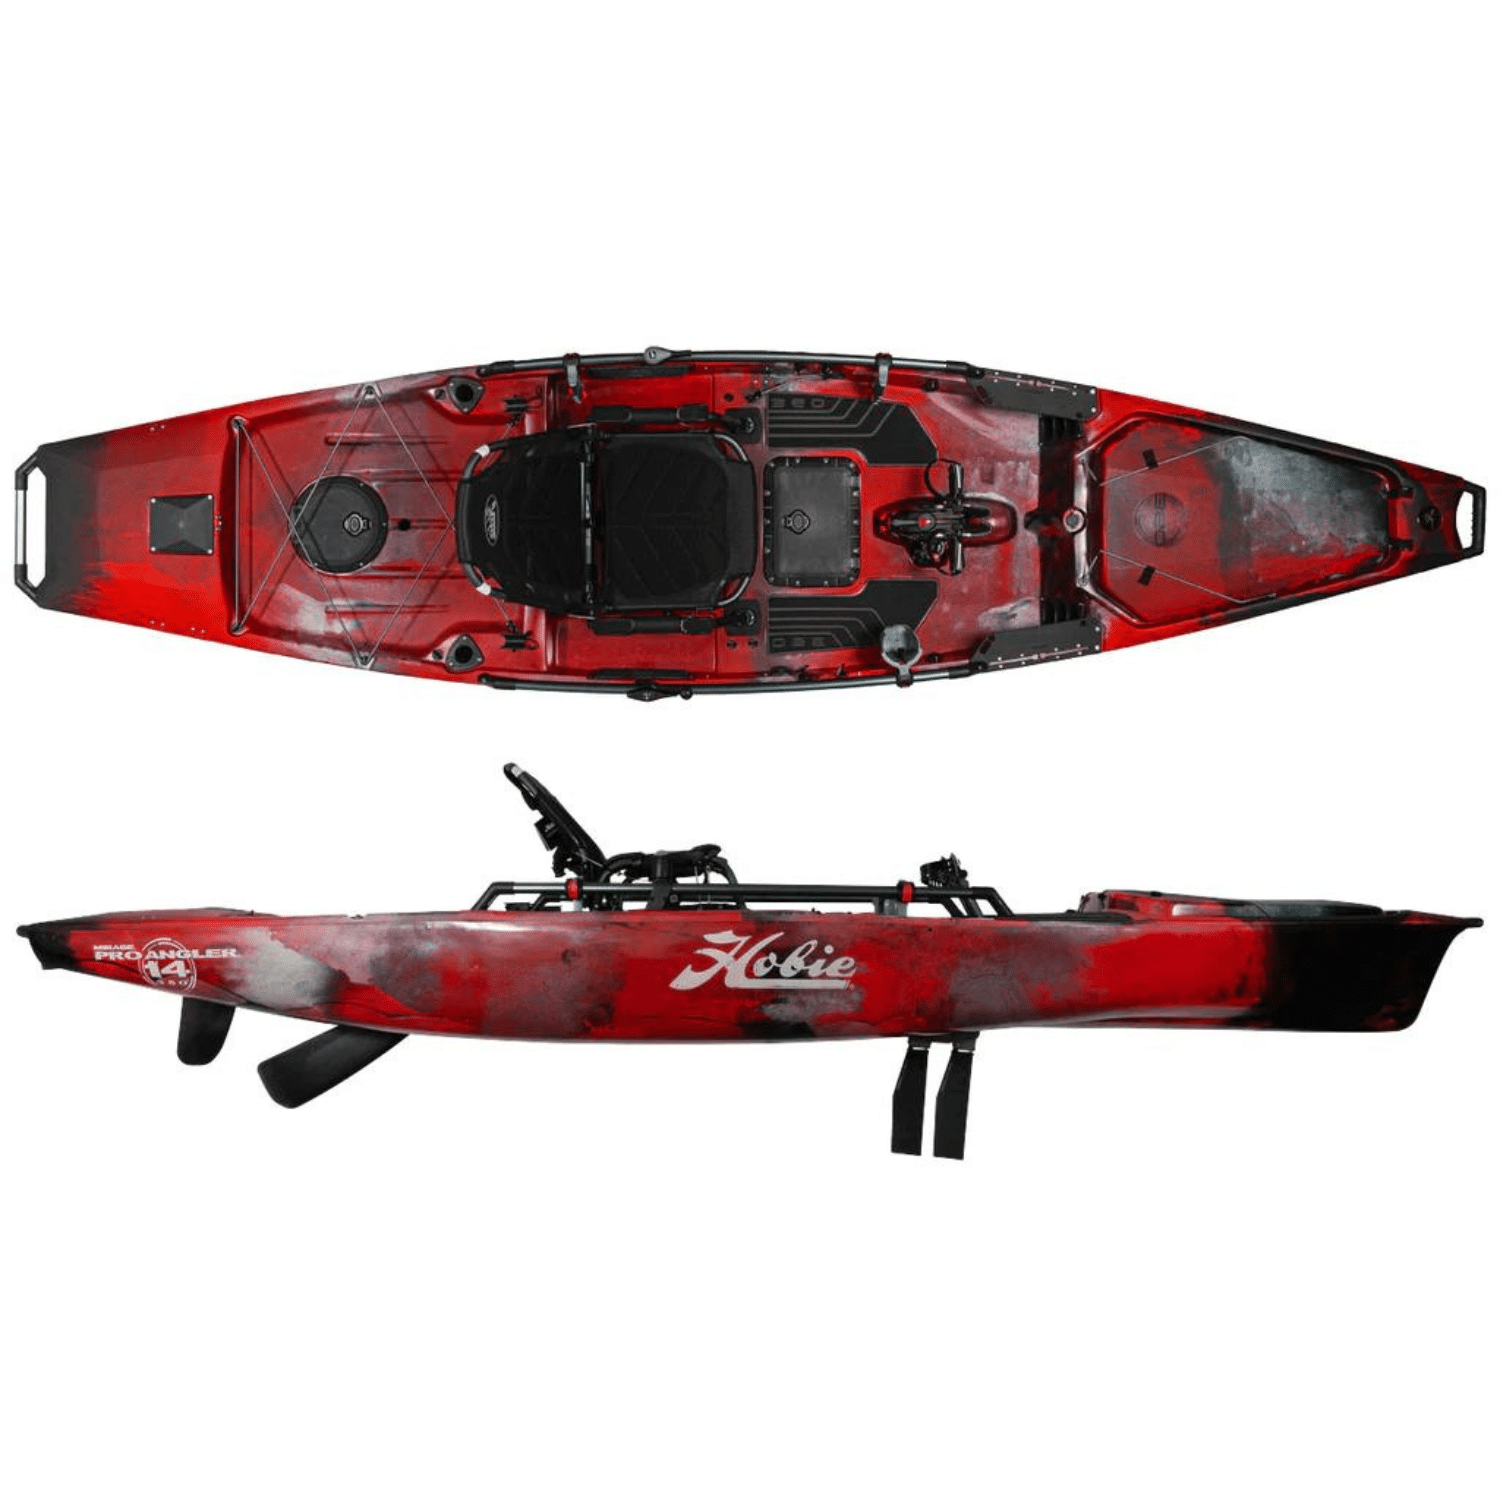 Top and side profiles of the Hobie Pro Angler 14 with 360XR pedal drive in Campfire (red) camo colour scheme